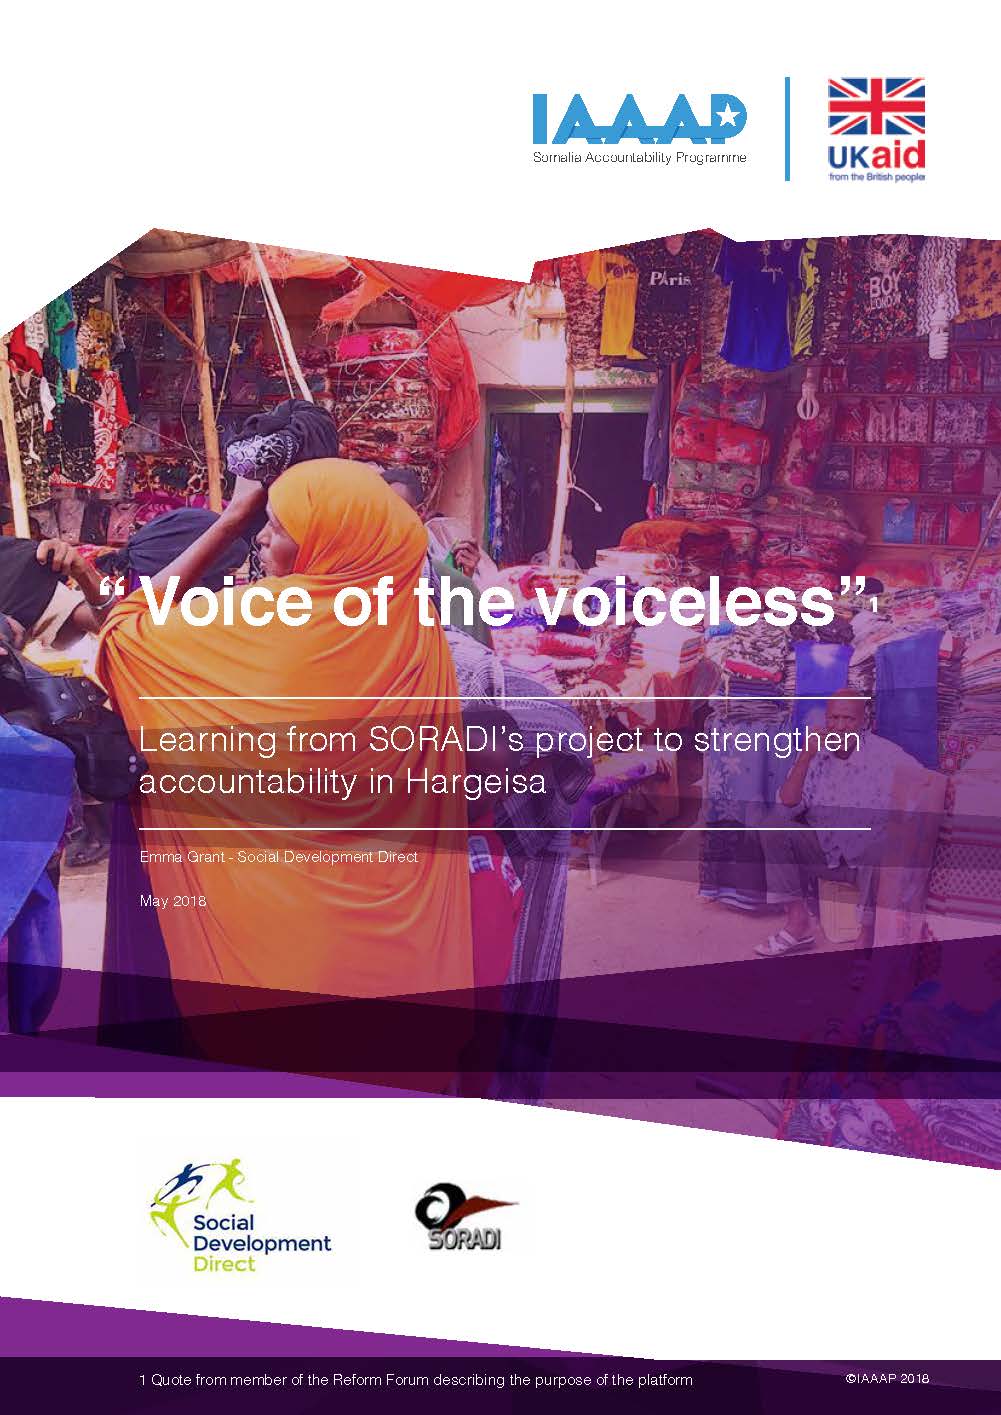 Front page of document- "voice of the voiceless quote" take from case study, in front of image of woman carrying shopping through busy market